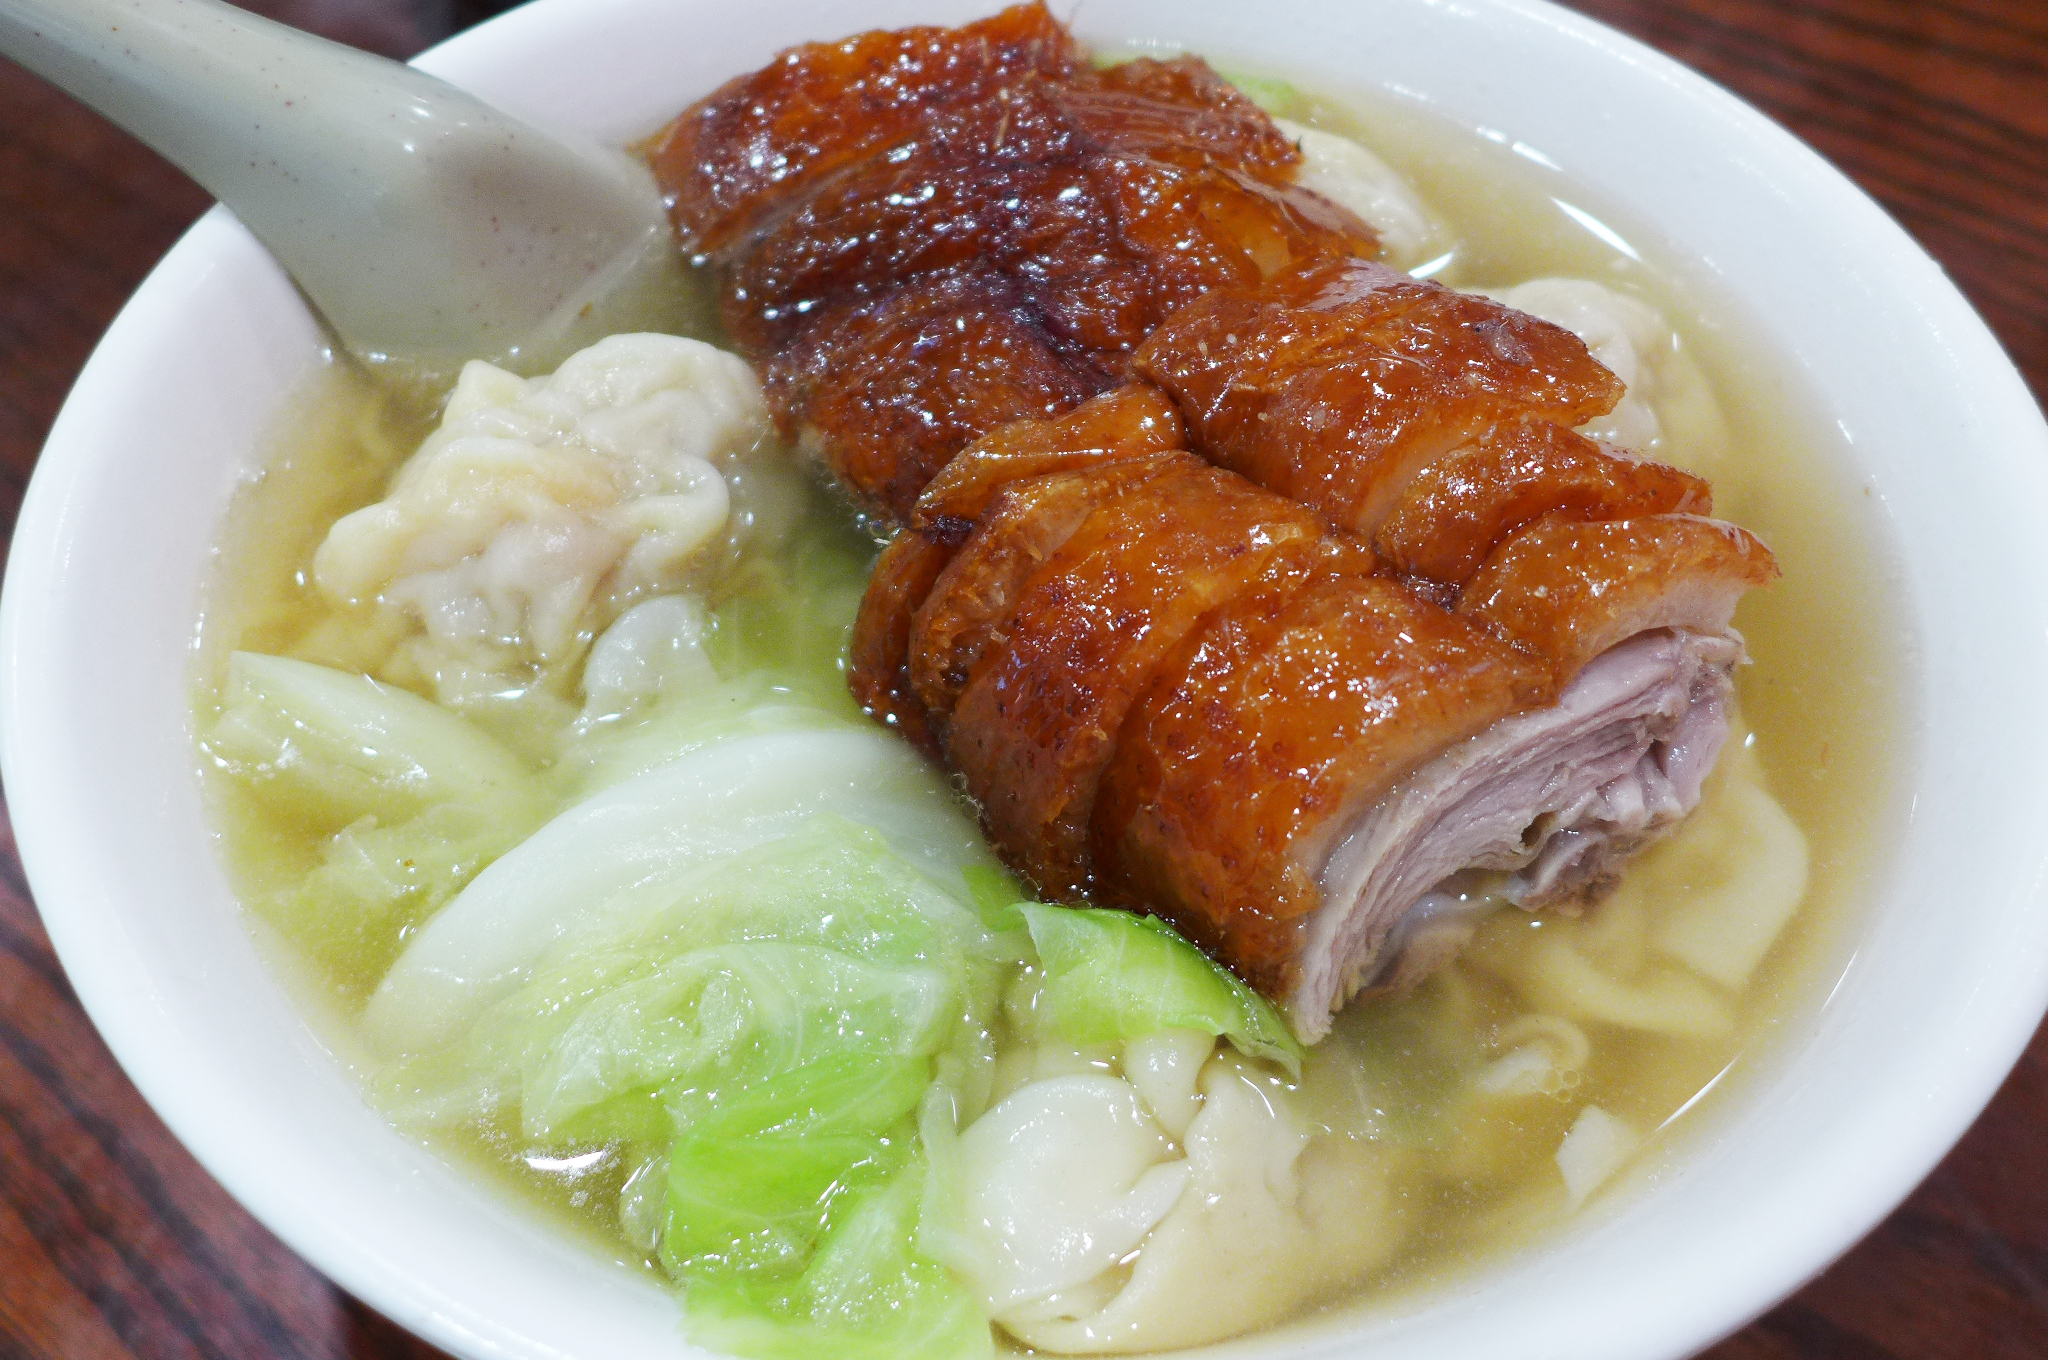 Chicken soup with roast duck, wontons, noodles, and cabbage in a white bowl